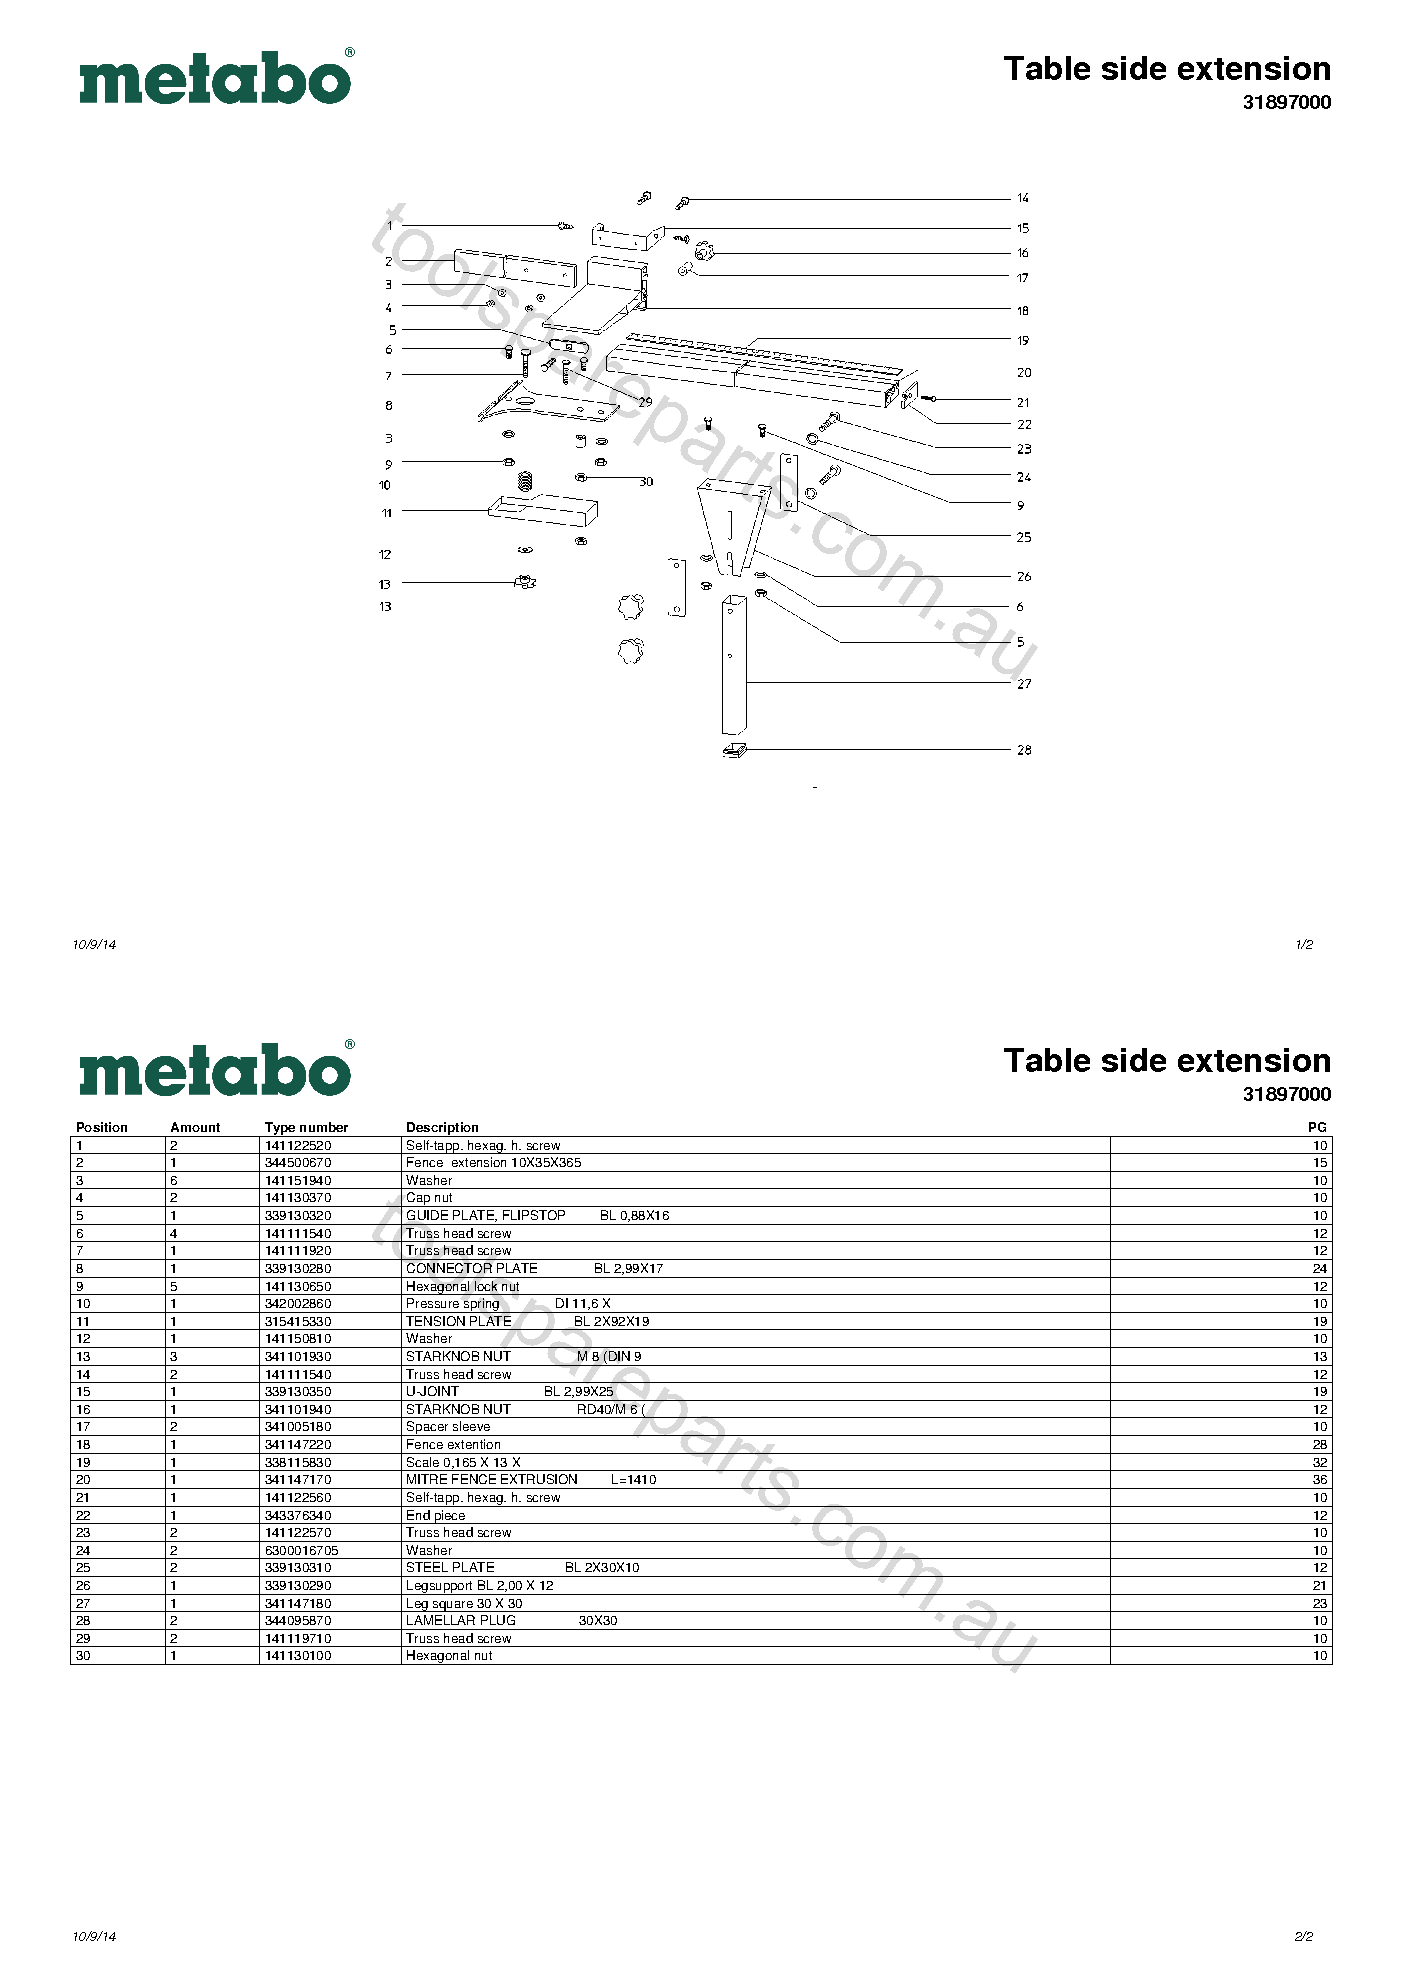 Metabo Table side extension 31897000  Diagram 1